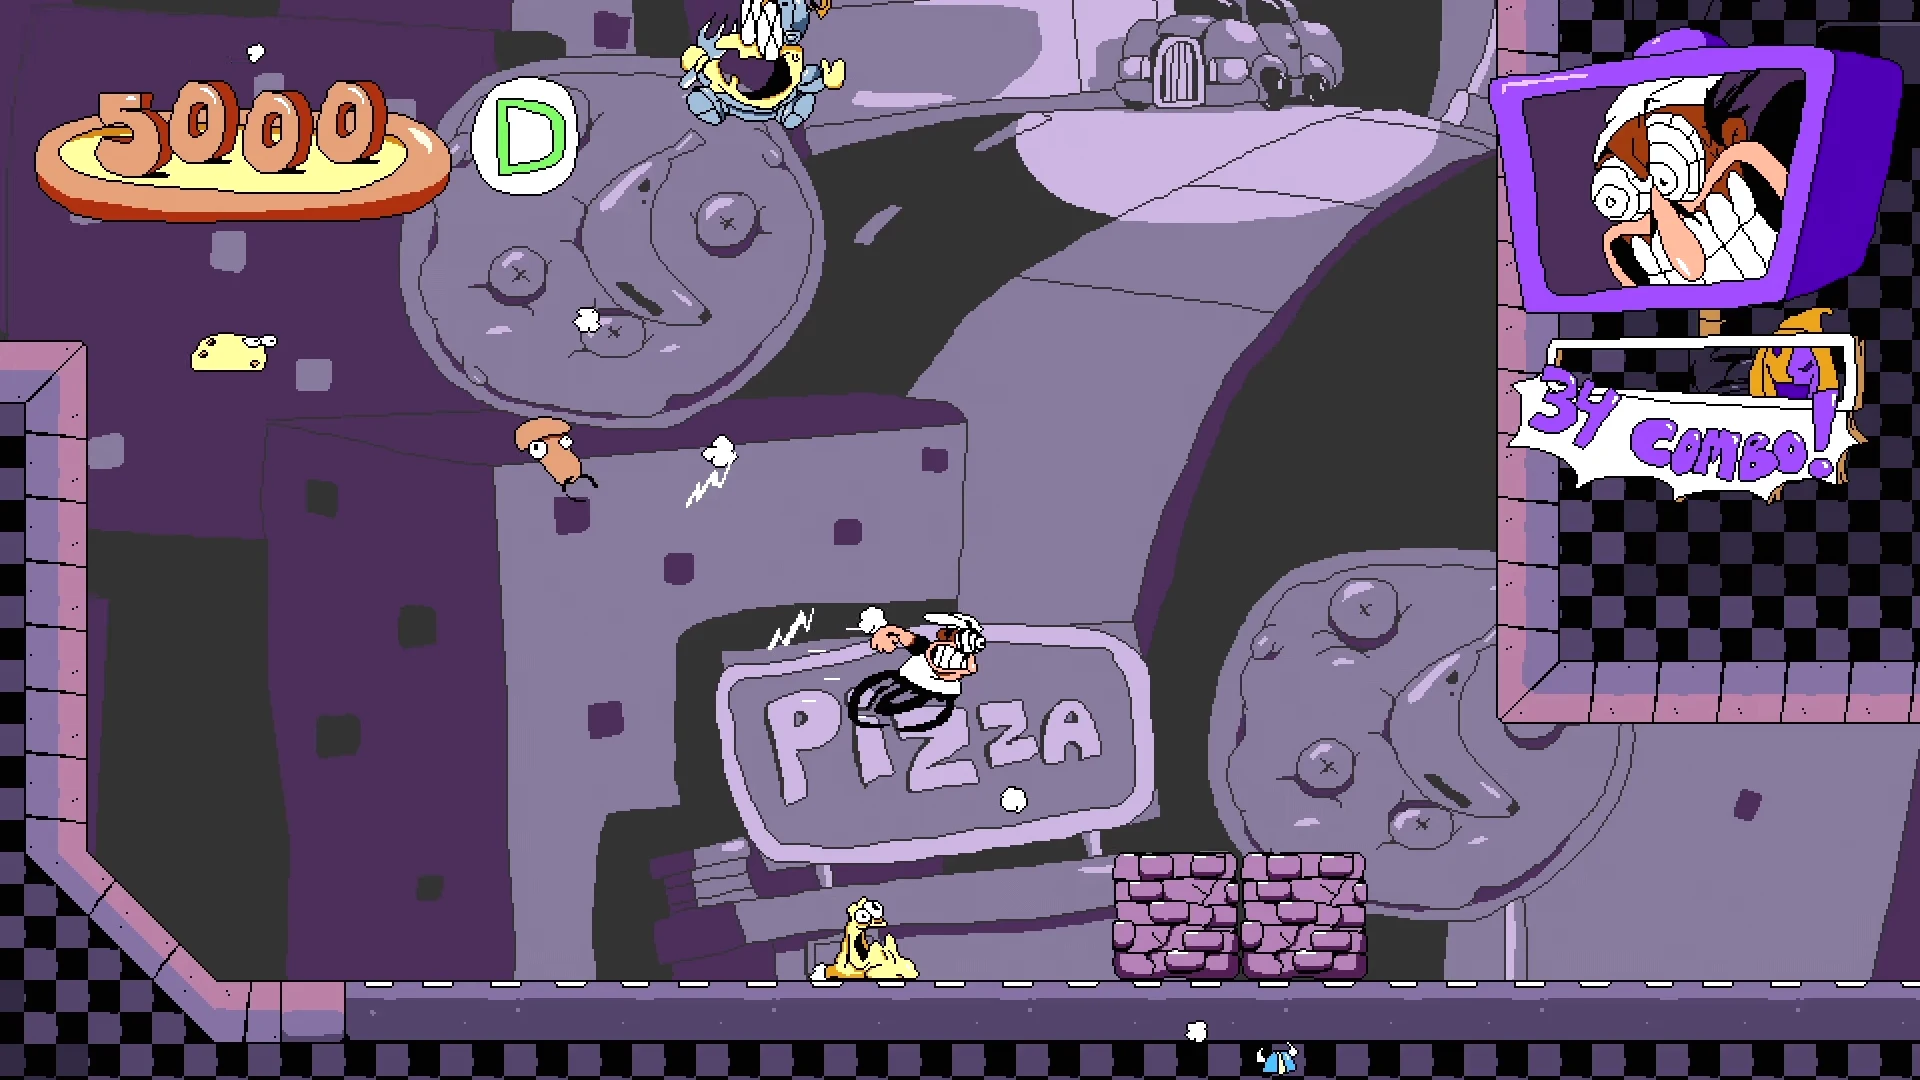 Pizza Tower Free PC Game Download Full Version - Gaming Beasts